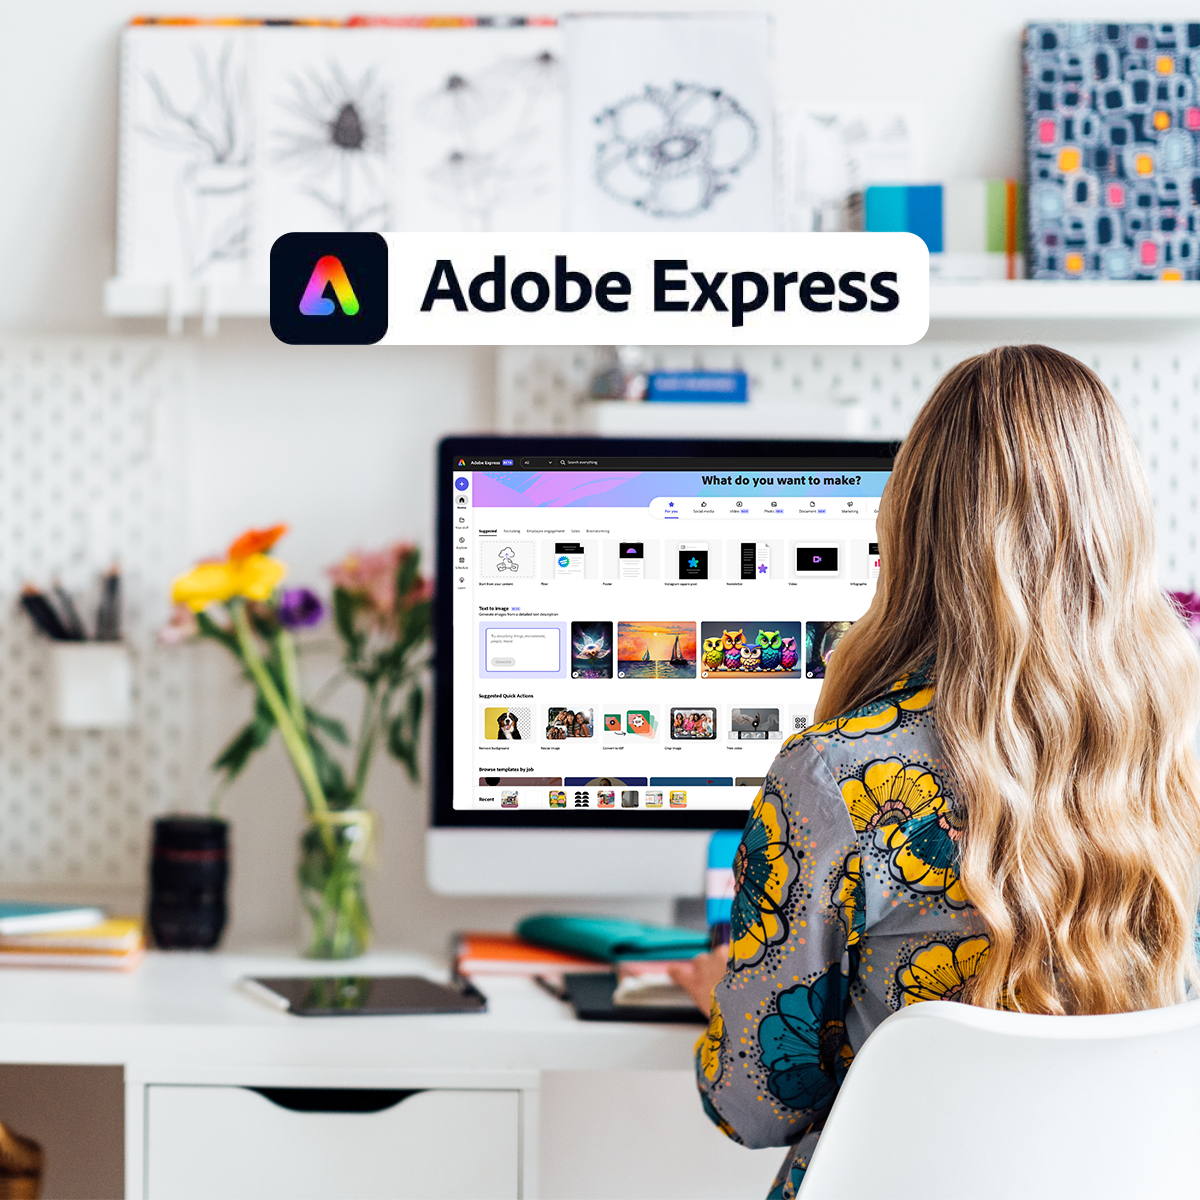 Start your branding journey with Adobe Express!